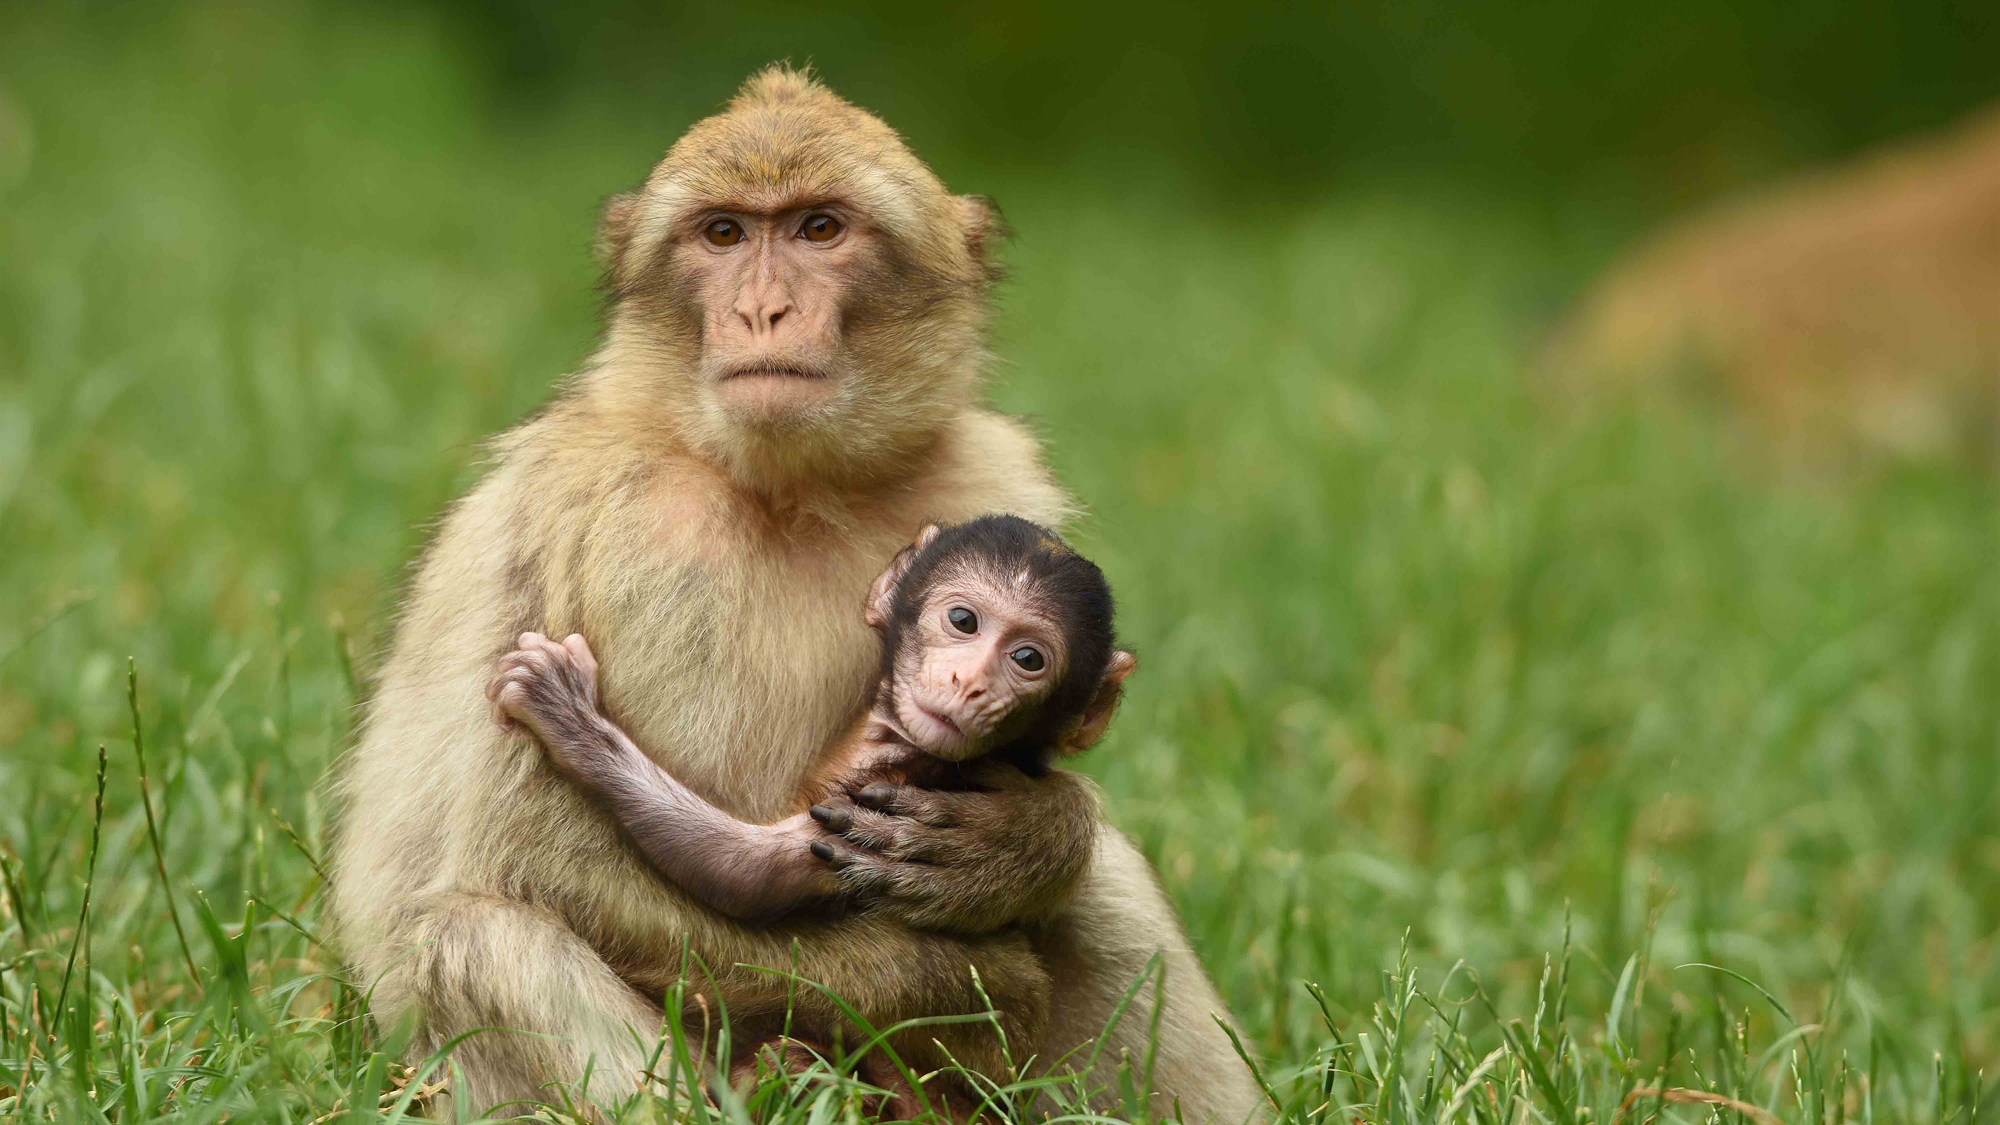 Monkey Mother And Baby - HD Wallpaper 